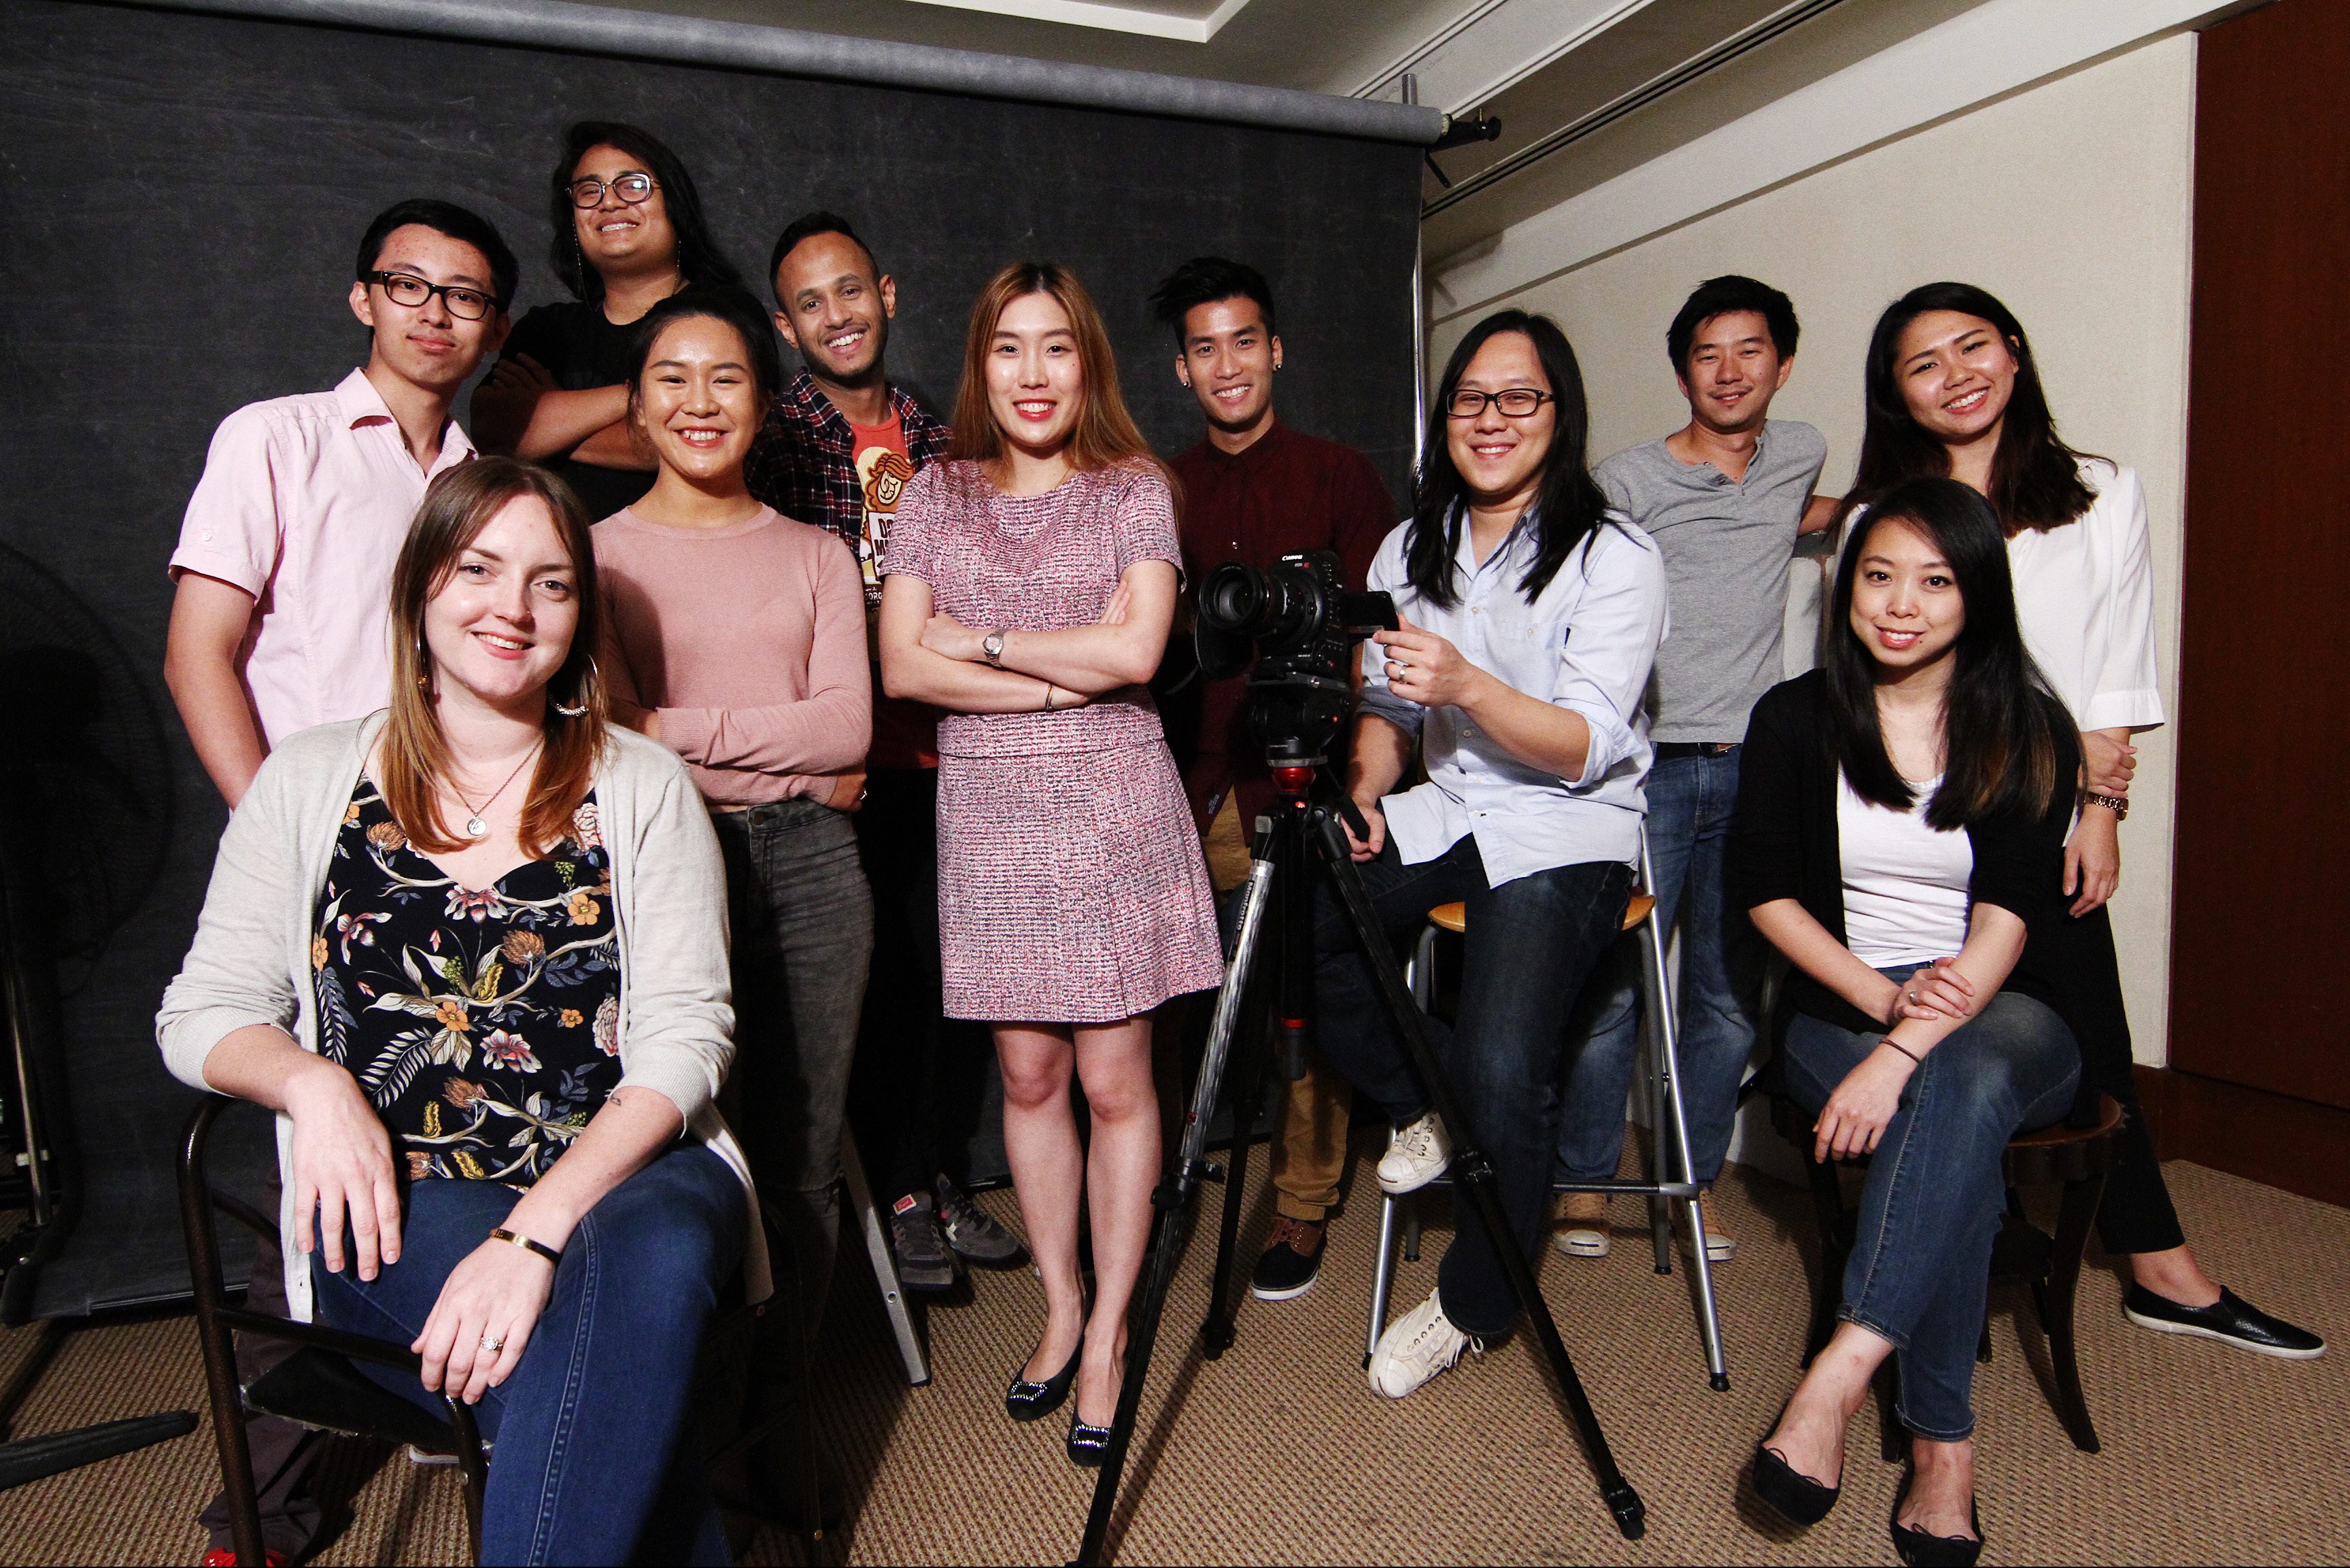 The R.AGE team of 2017: (From left) Claire Anthony (seated), Julien Chen, Hafriz Iqbal, Clarissa Say, Shanjeev Reddy, Natasha Venner-Pack, Hansel Khoo, Ian Yee, Elroi Yee, Lim May Lee (seated), Samantha Chow and Chen Yih Wen (not in picture). — RAYMOND OOI/ The Star